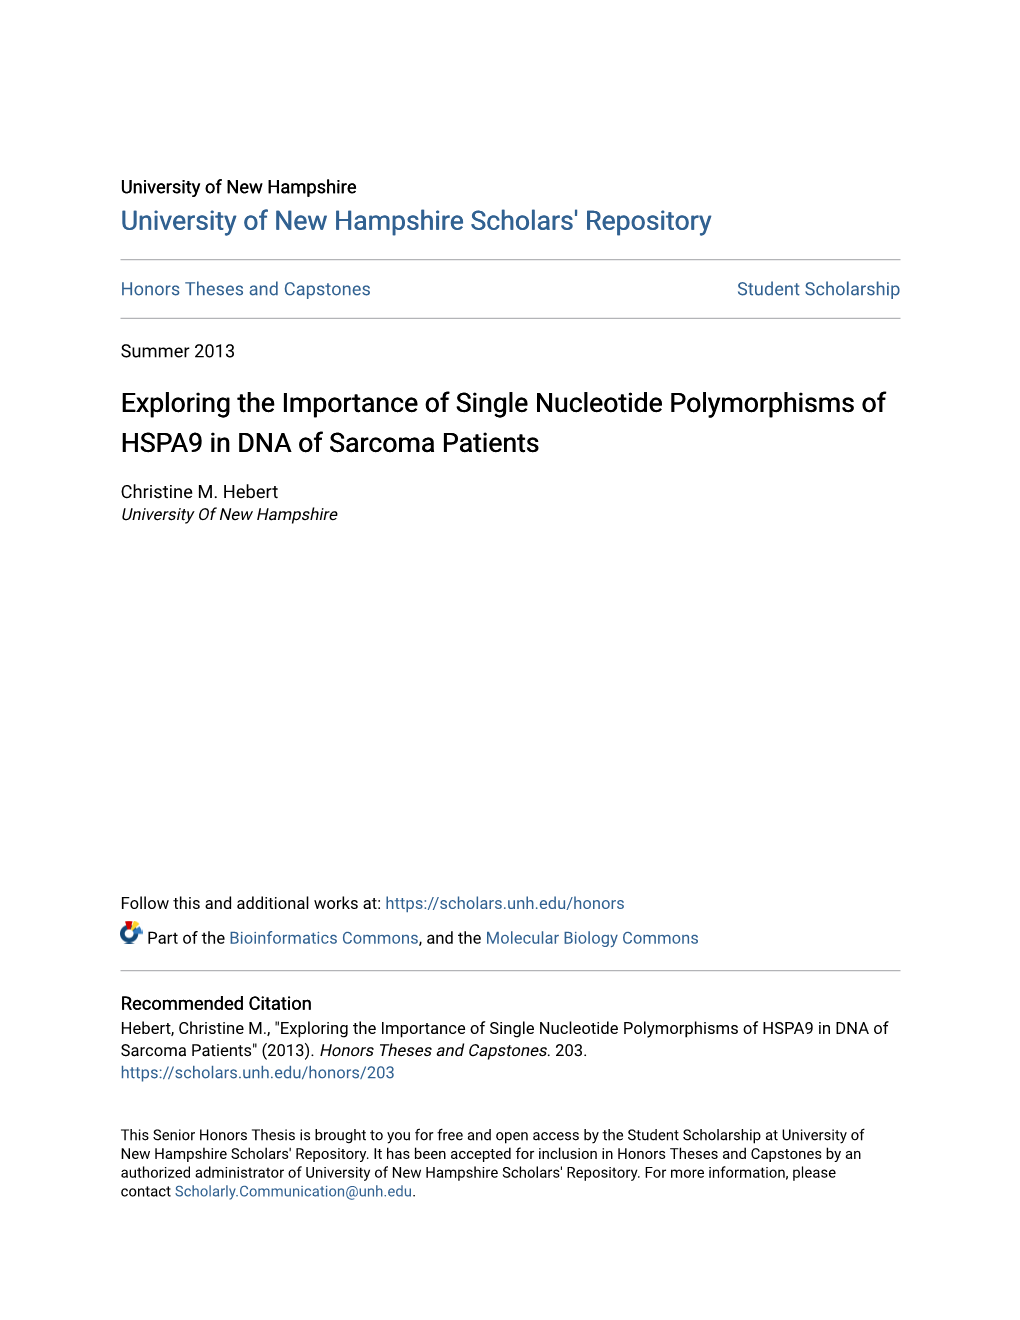 Exploring the Importance of Single Nucleotide Polymorphisms of HSPA9 in DNA of Sarcoma Patients